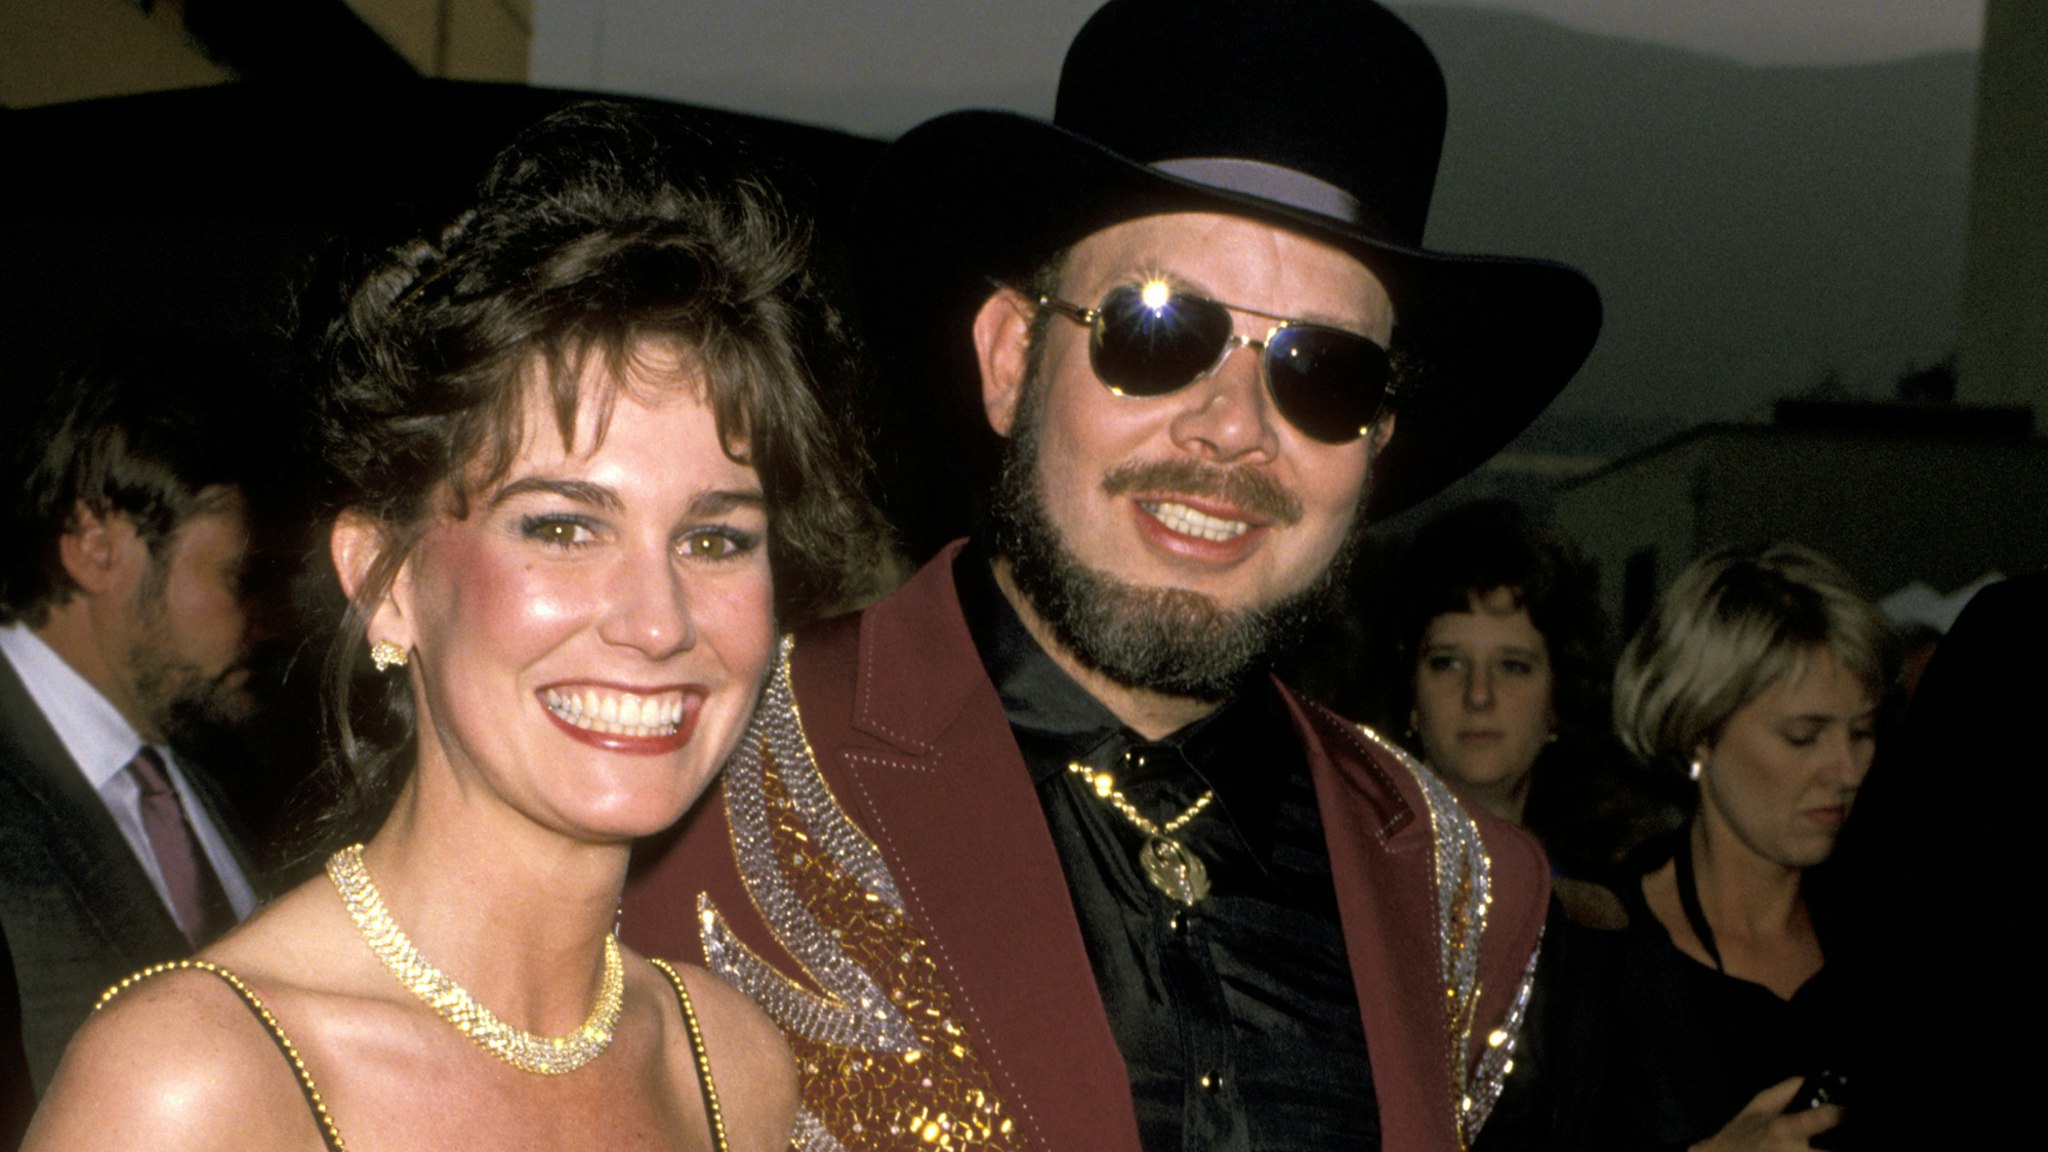 Hank Williams Jr. and Wife Mary Jane Thomas during 24th Annual Academy of Country Music Awards at Disney Studio in Los Angeles, California, United States.